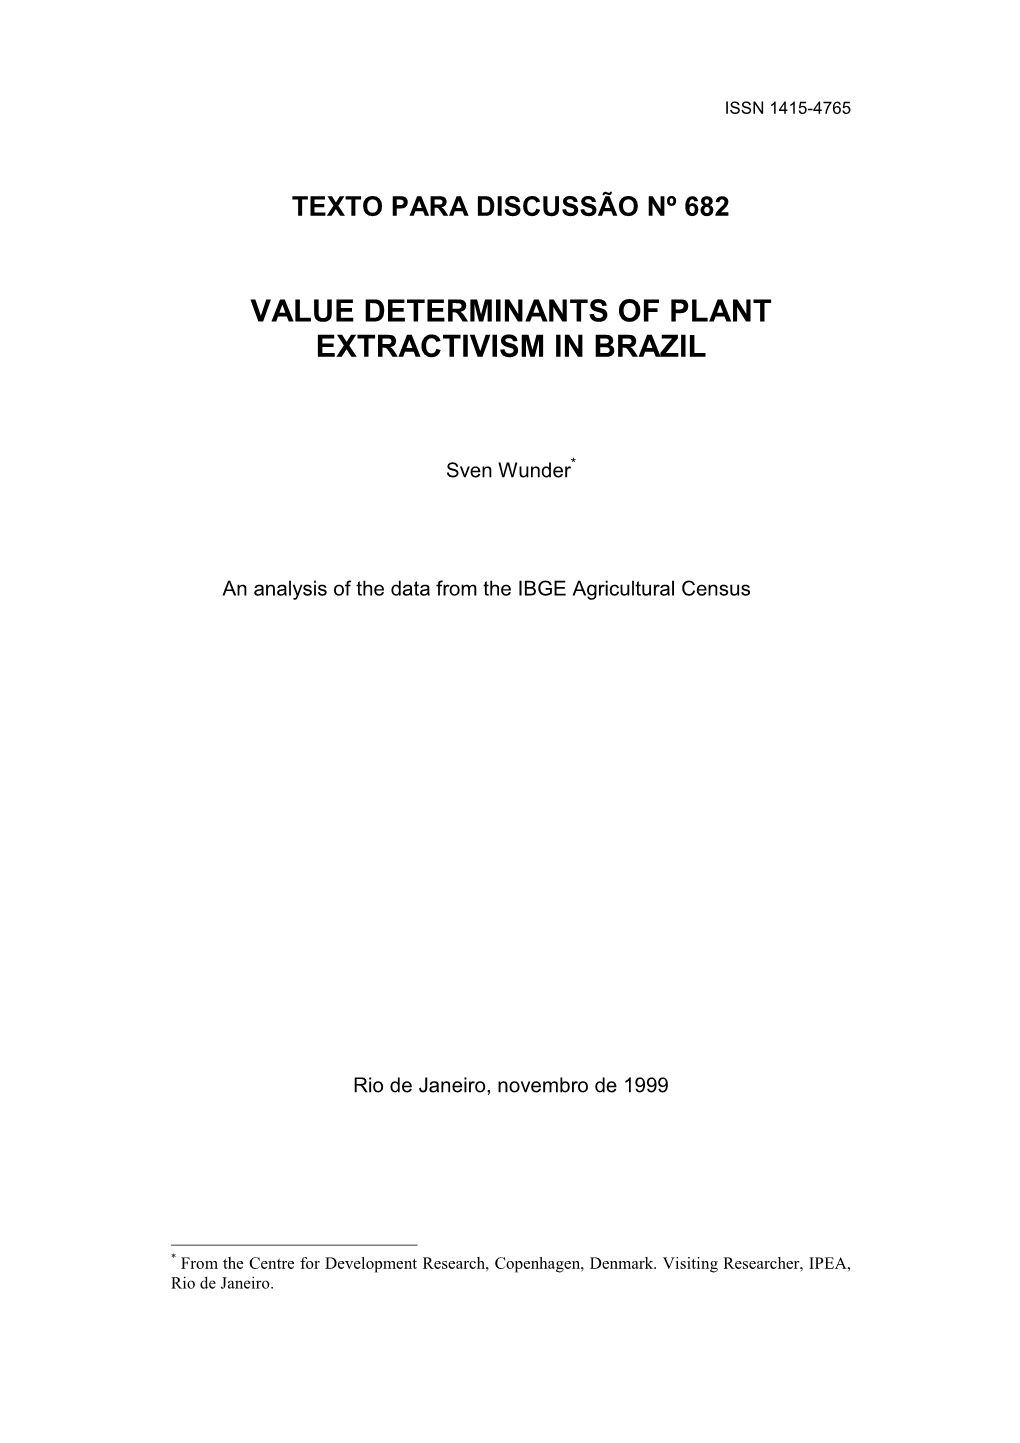 Value Determinants of Plant Extractivism in Brazil